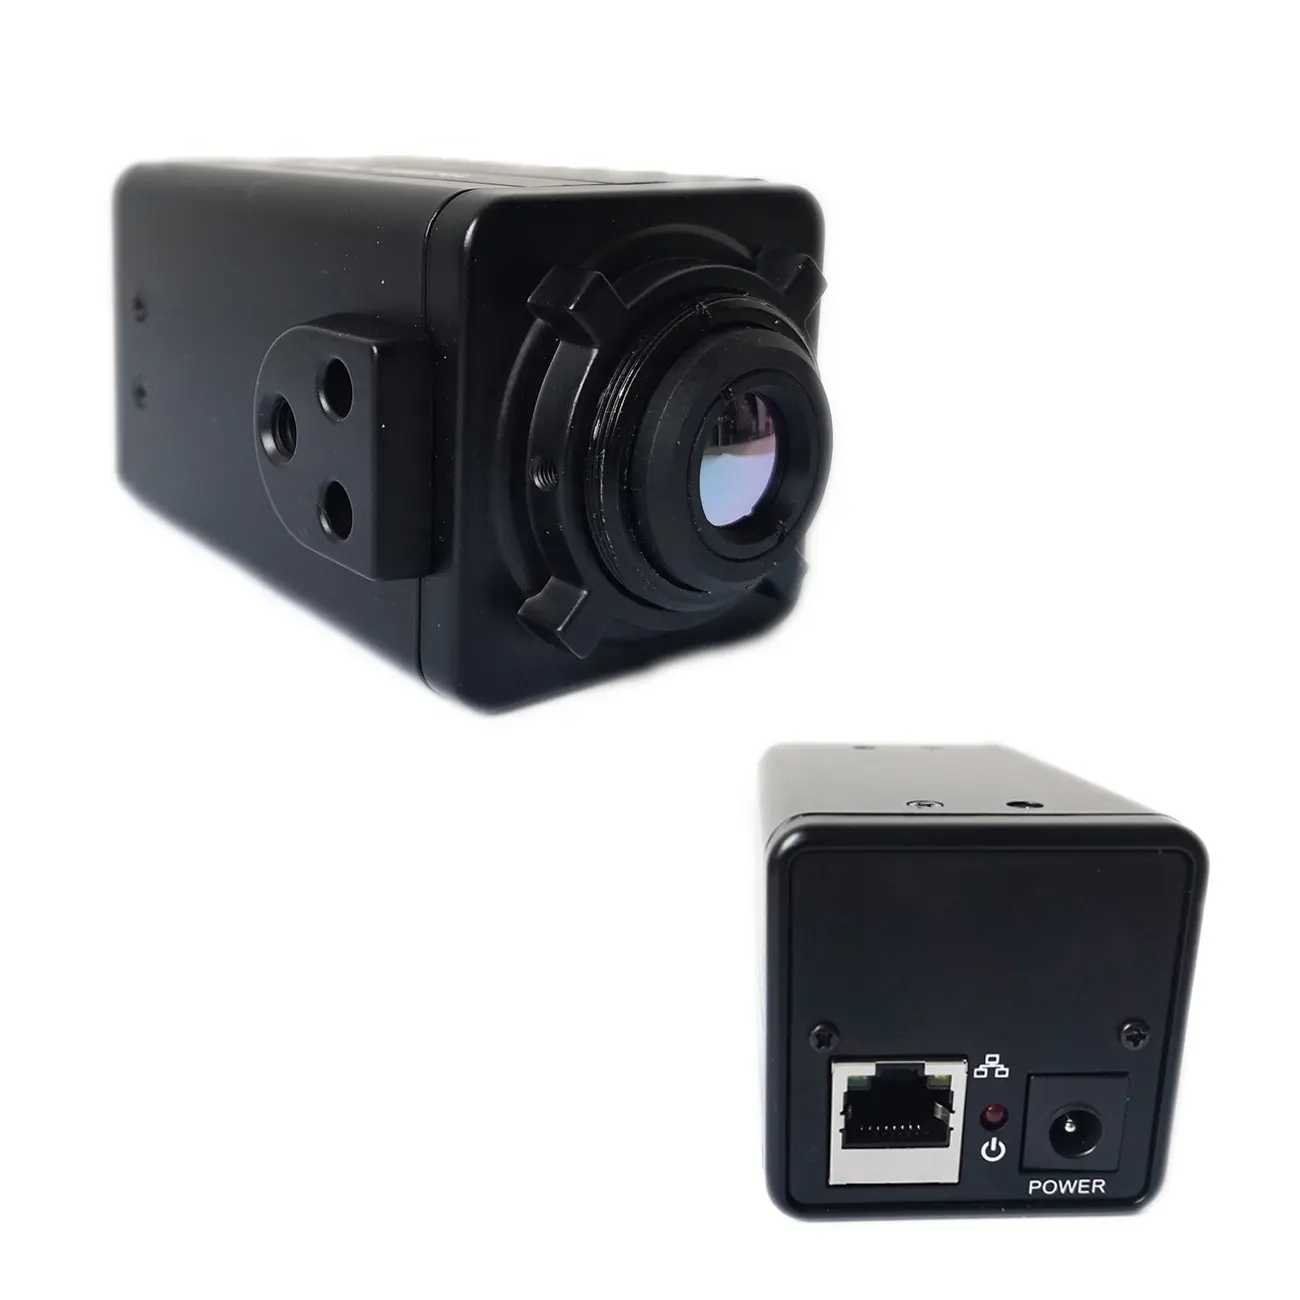 IP-online lwir infrared uncooled night vision thermal imaging cctv security camera 384x288 320x240 640x480